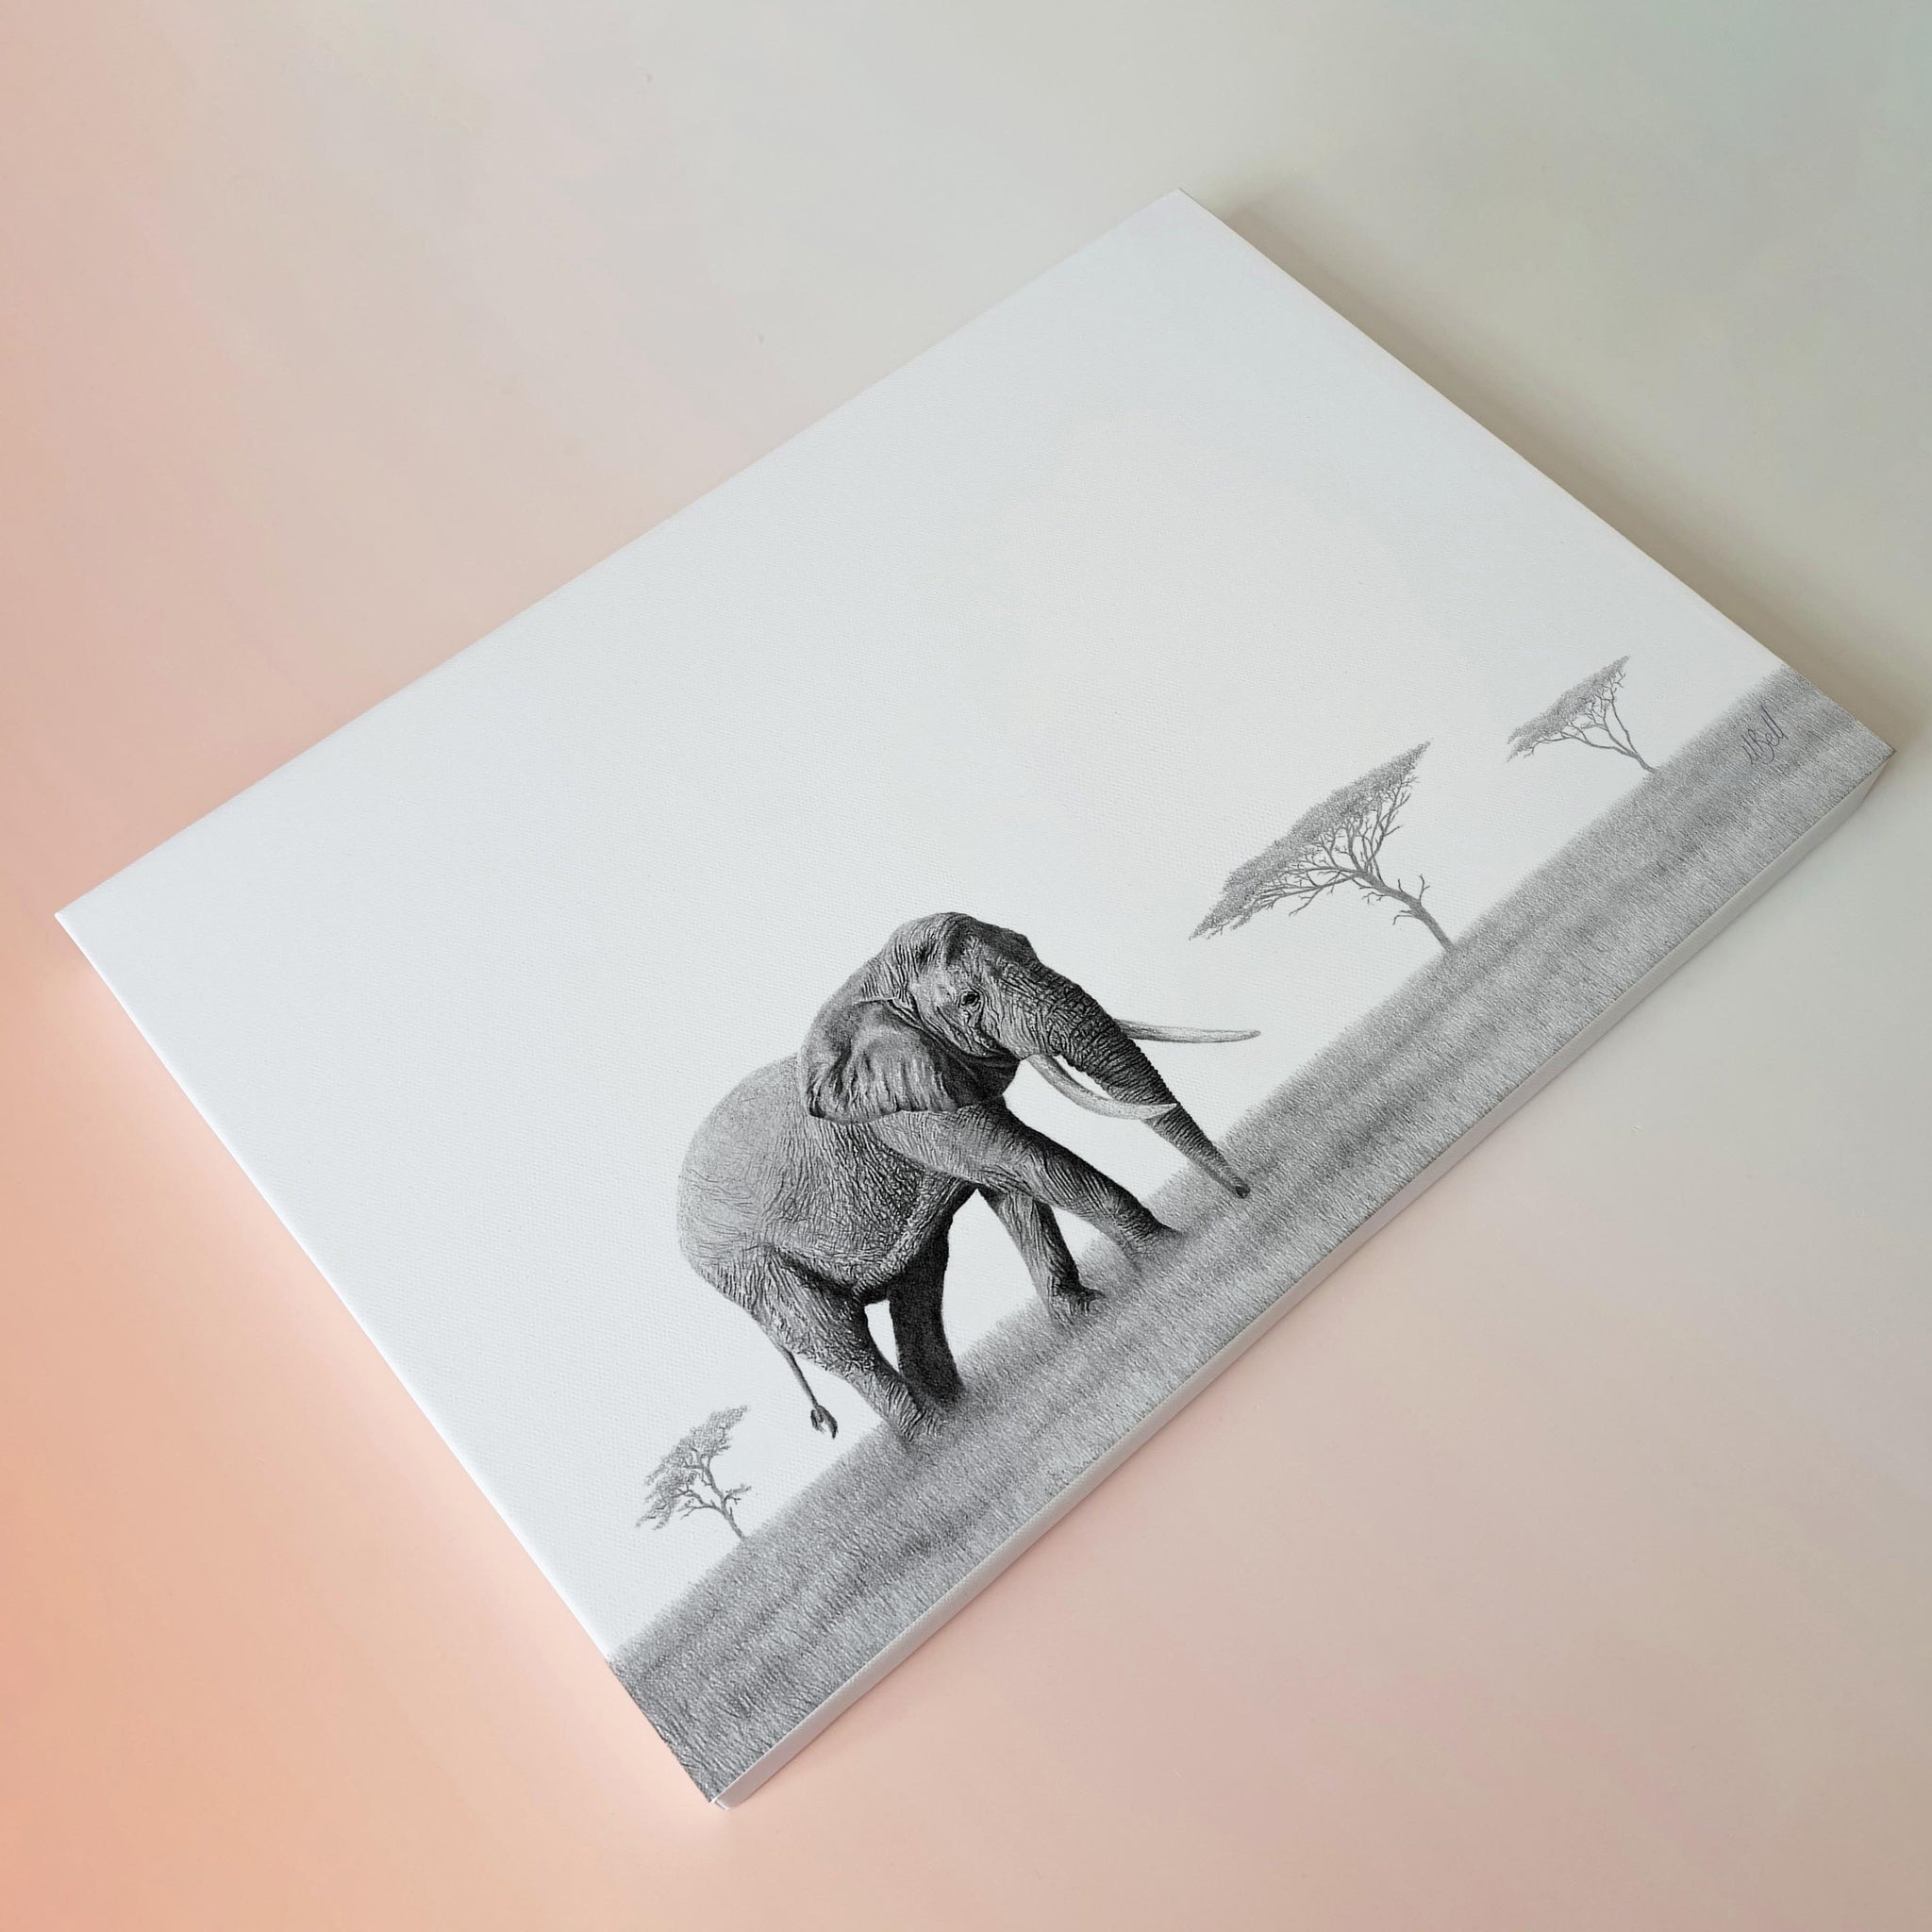 African bull elephant pencil drawing on a stretched canvas